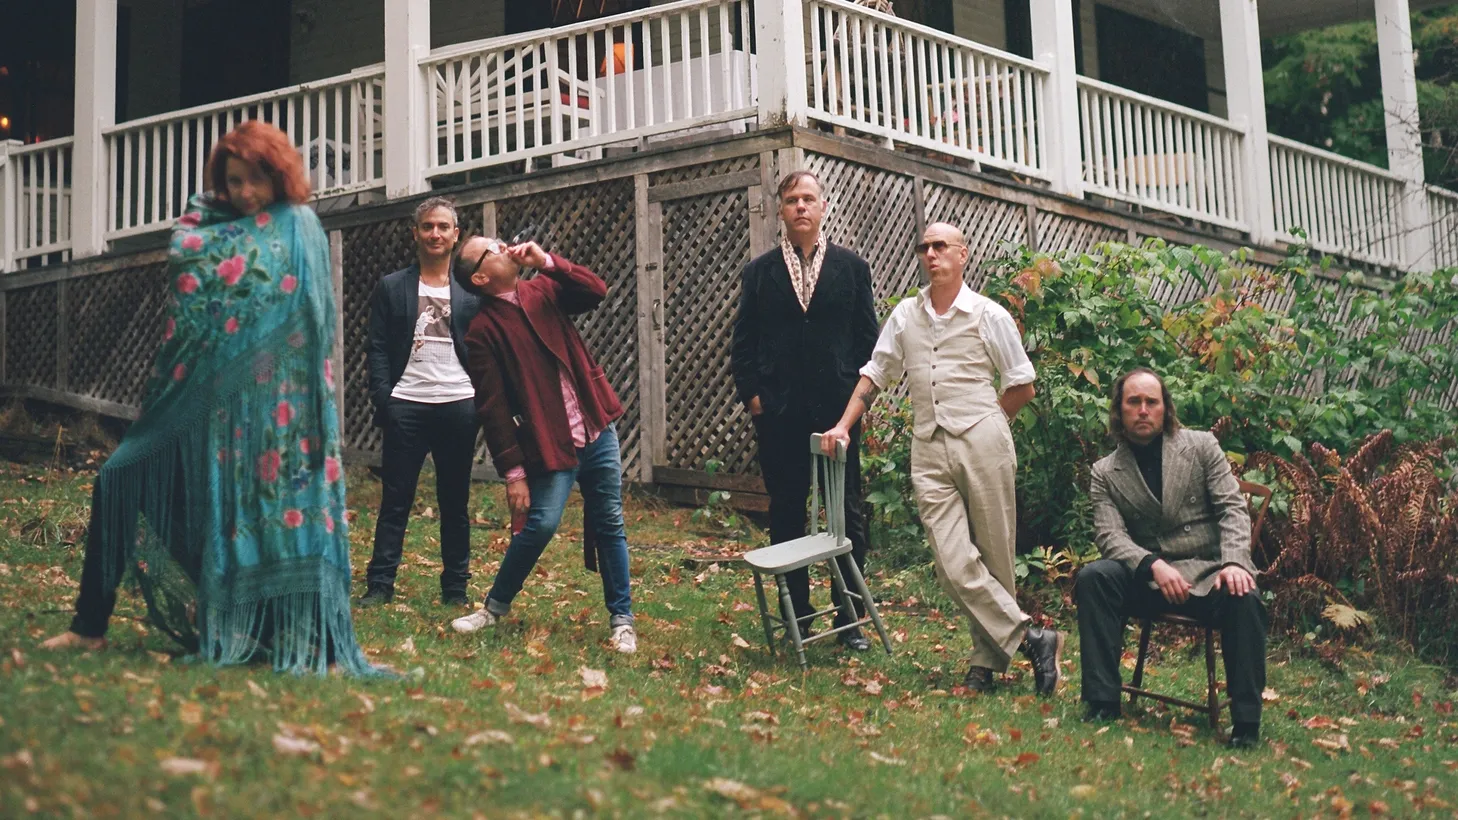 Nine albums in, Montreal’s Stars turn in their first full-length in five years “From Capelton Hill,” to glowing reviews. If you are in the mood for epic choruses, a little nostalgia, and Britpop arrangements, “Pretenders” is for you!